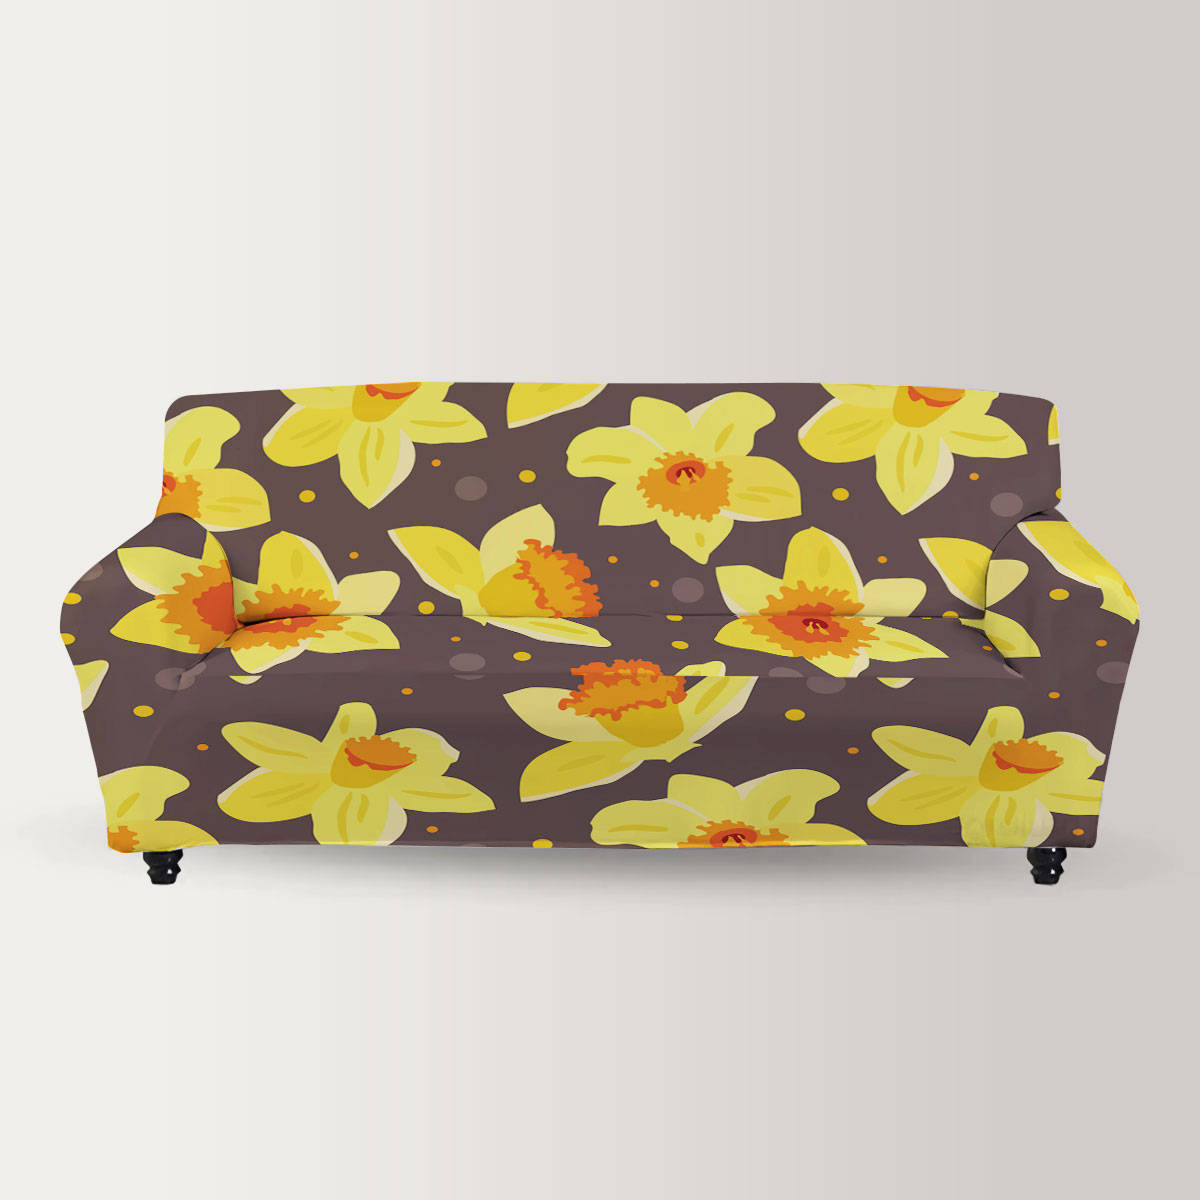 Yellow Daffodils On Brown Background Sofa Cover